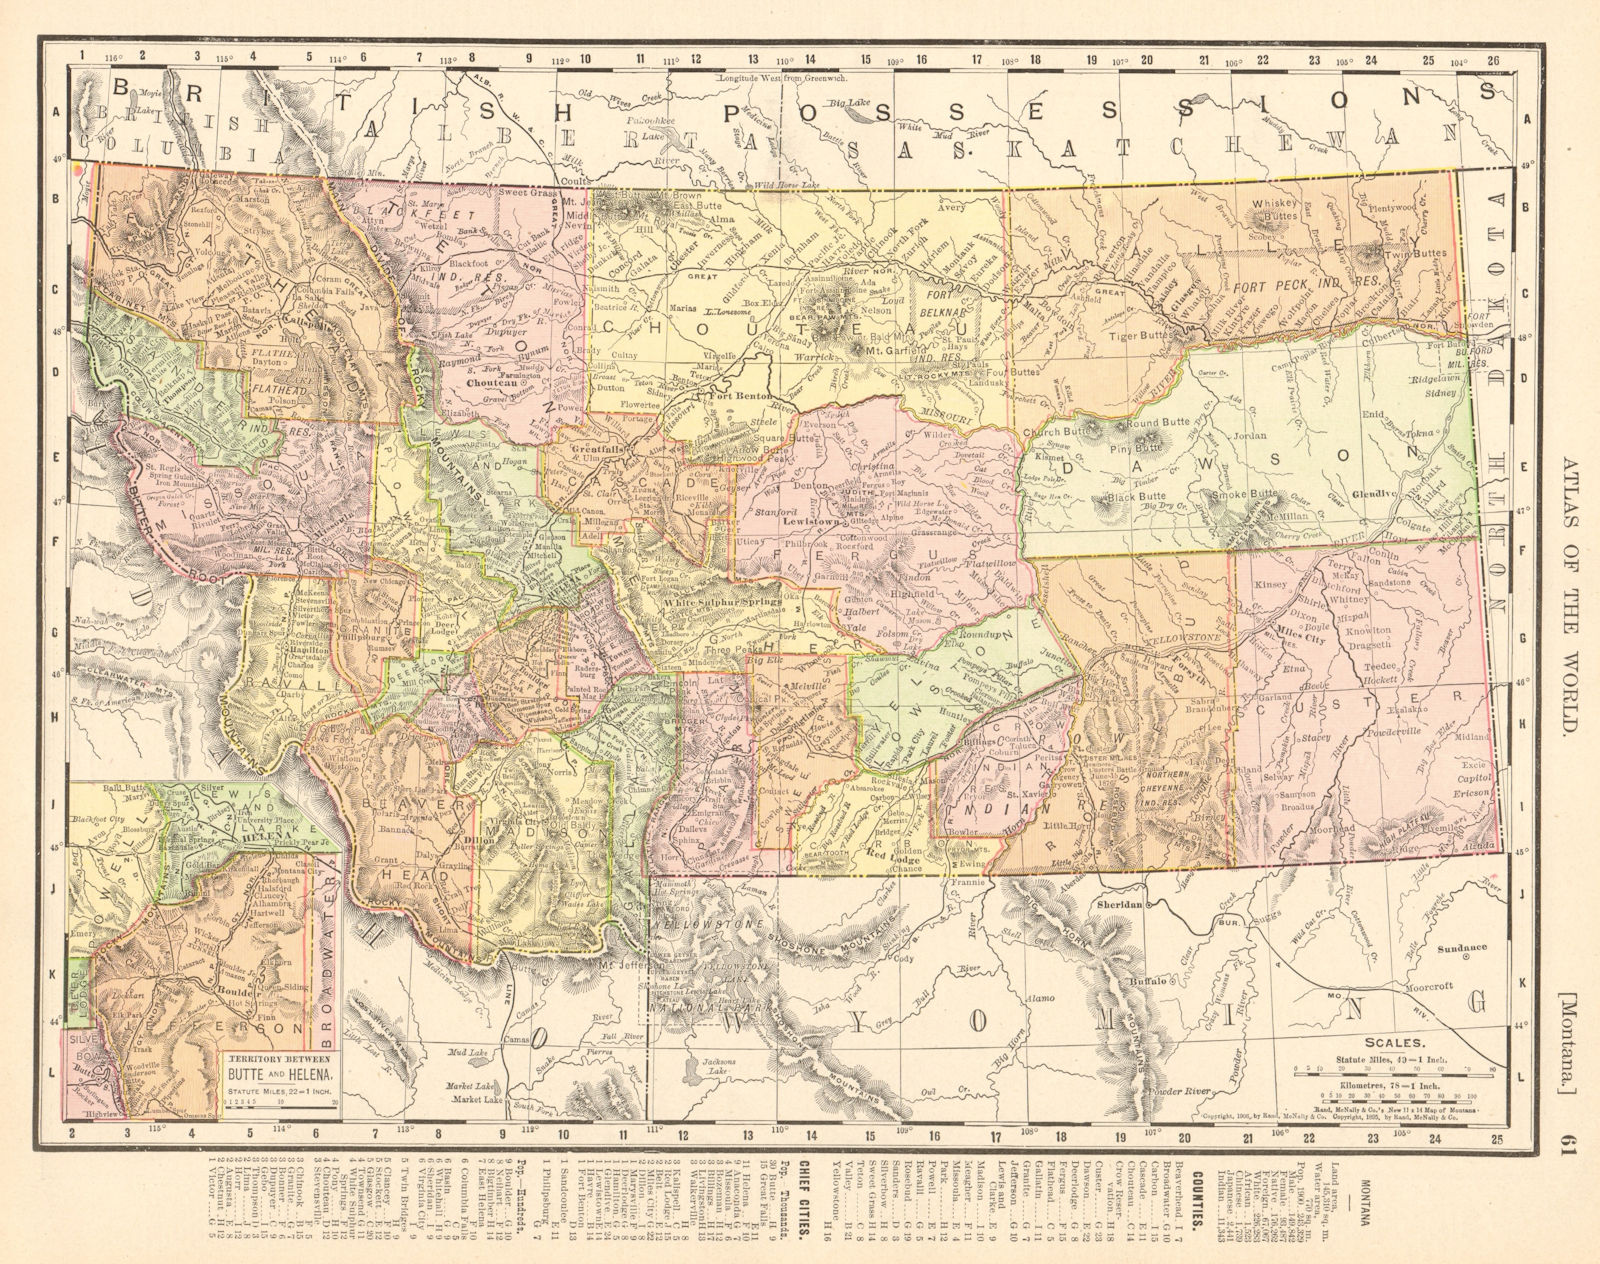 Montana state map showing counties. Yellowstone. RAND MCNALLY 1906 old